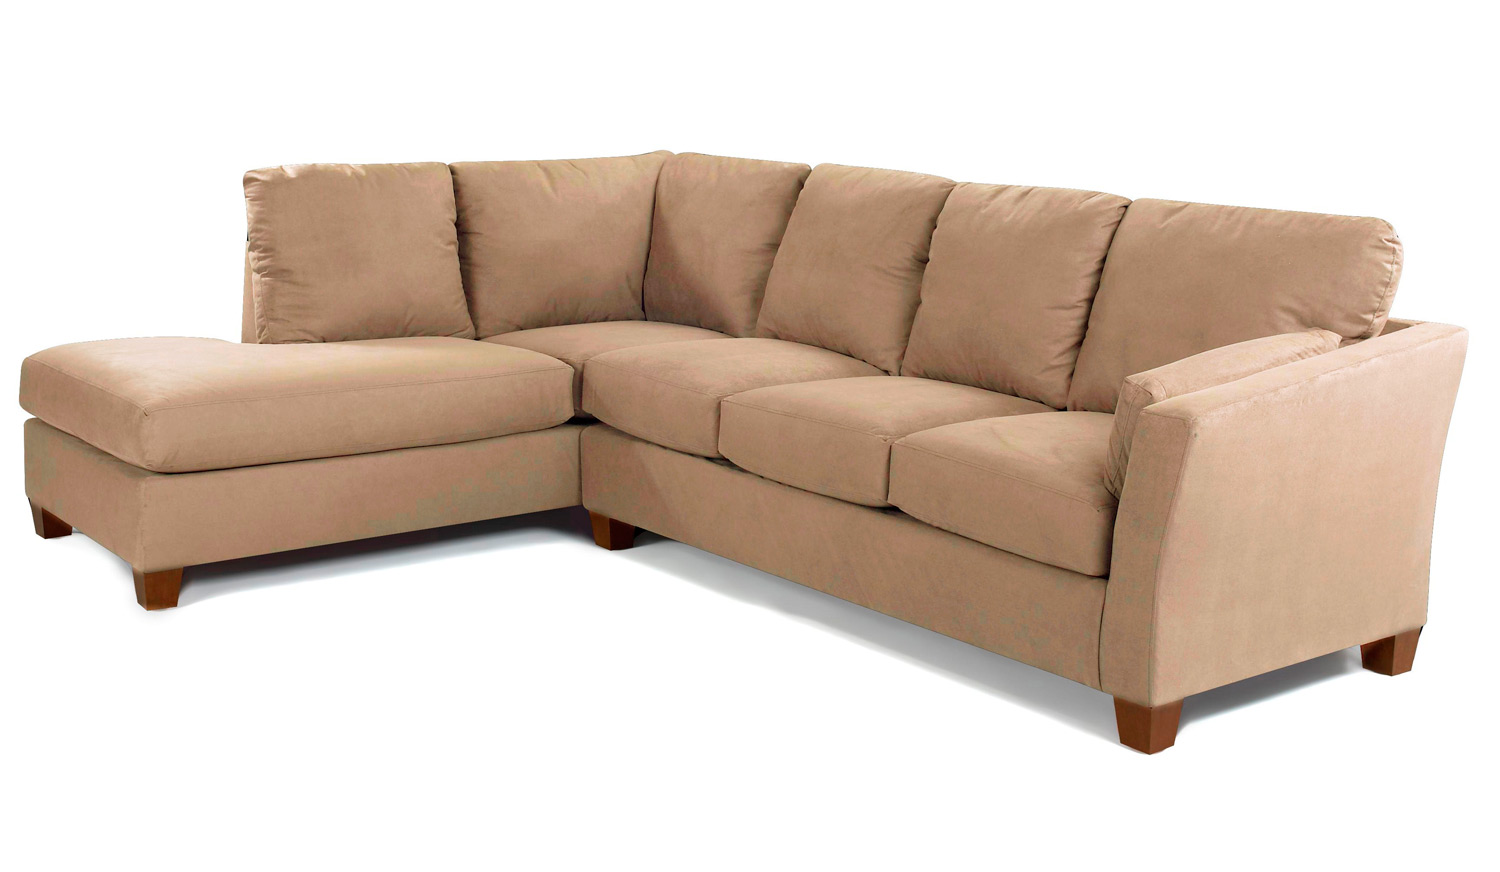 Klaussner Drew Sectional Sofa - Libre Taupe